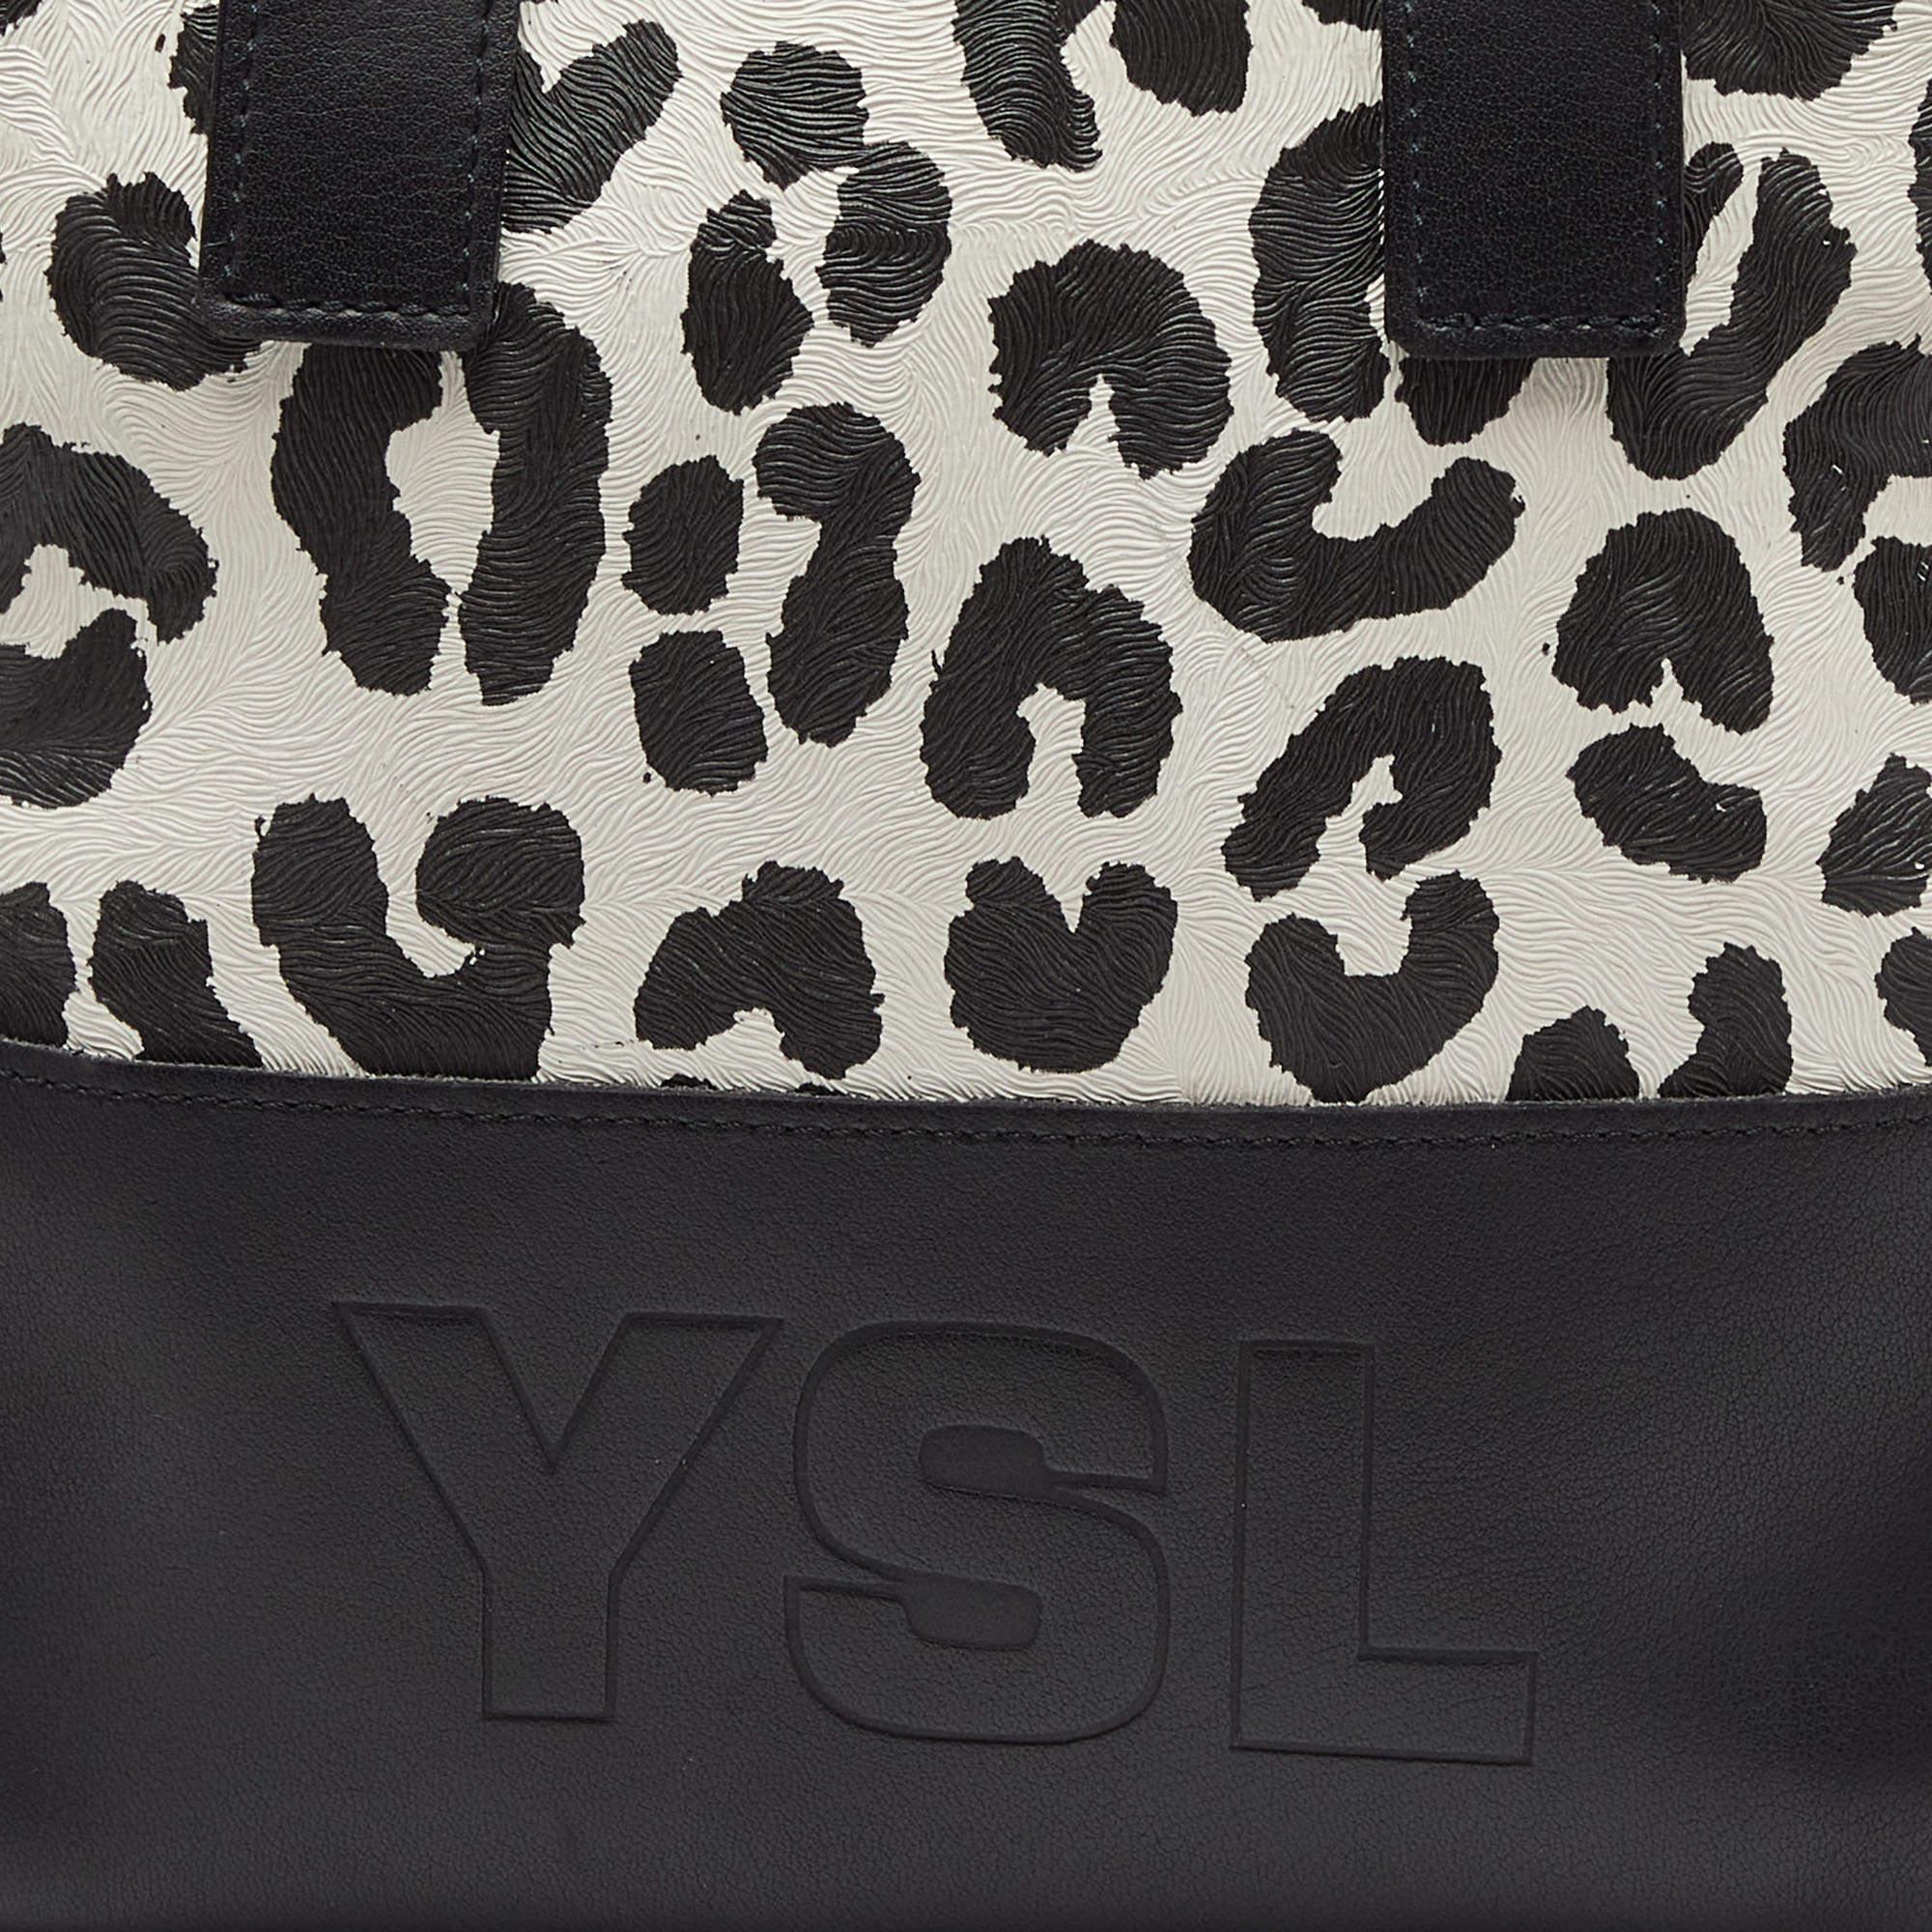 Yves Saint Laurent Black/White Leopard Print Coated Canvas and Leather Satchel For Sale 4